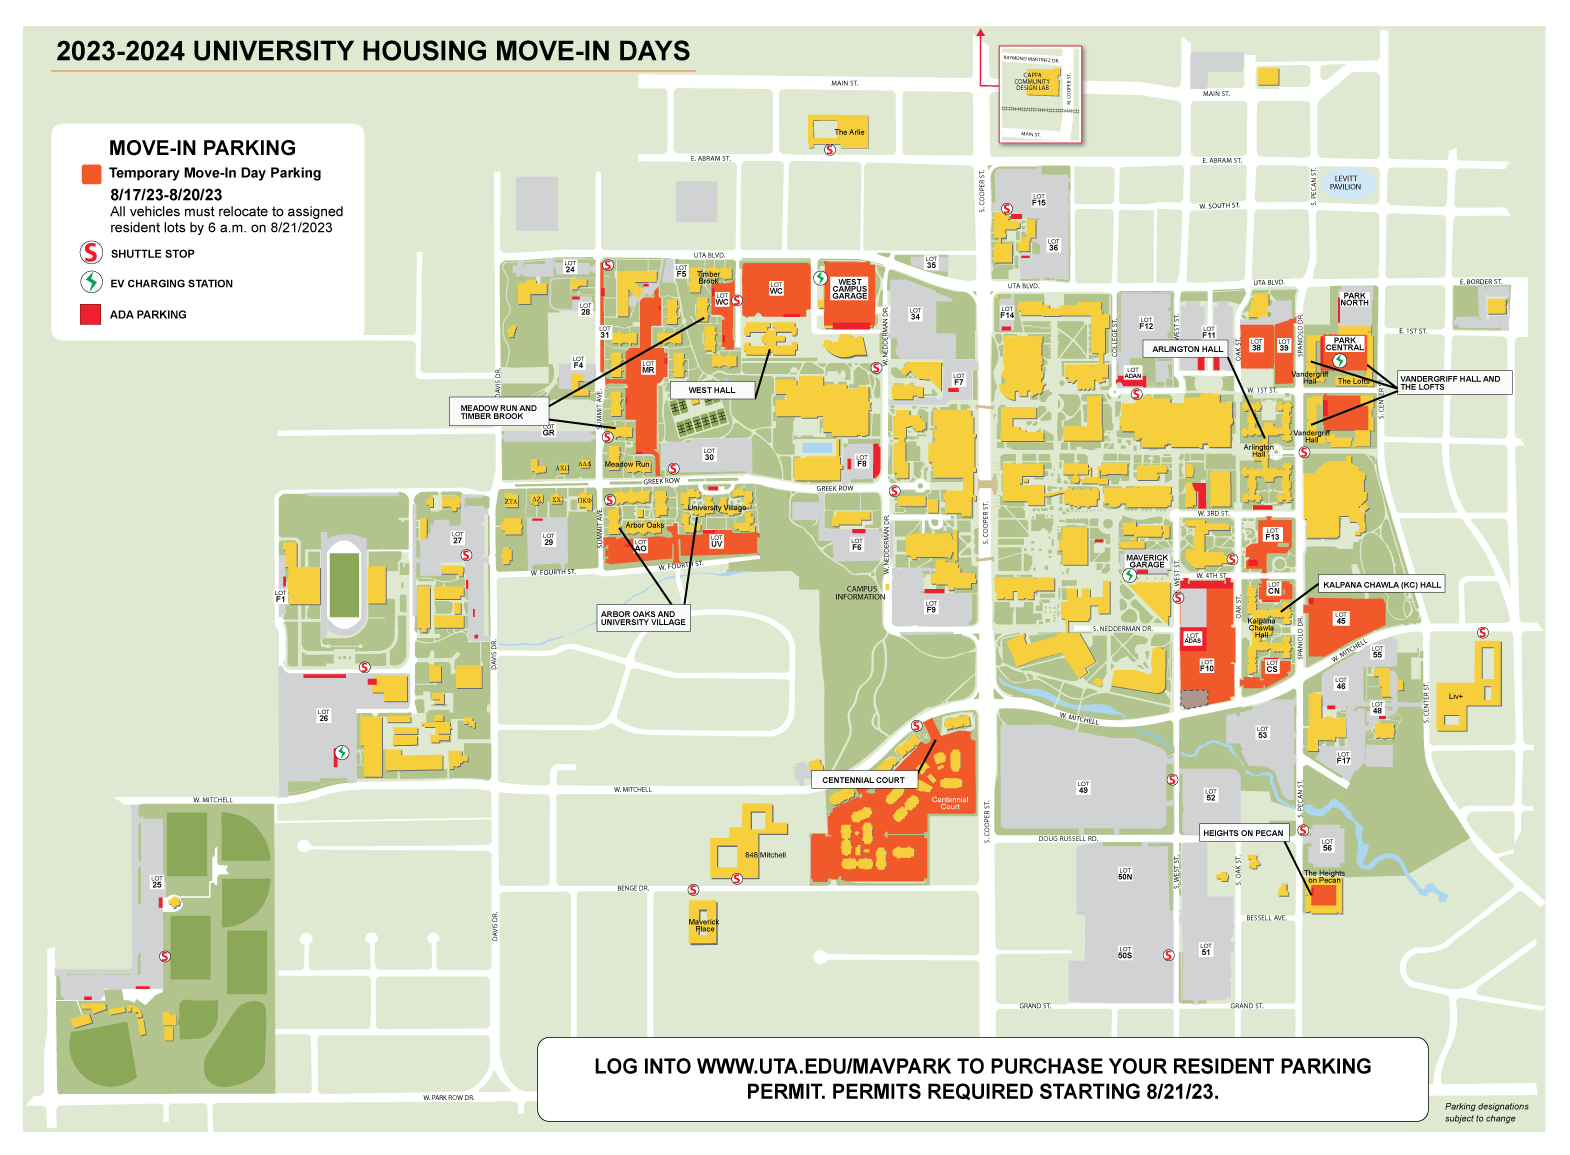 Image of move-in parking map